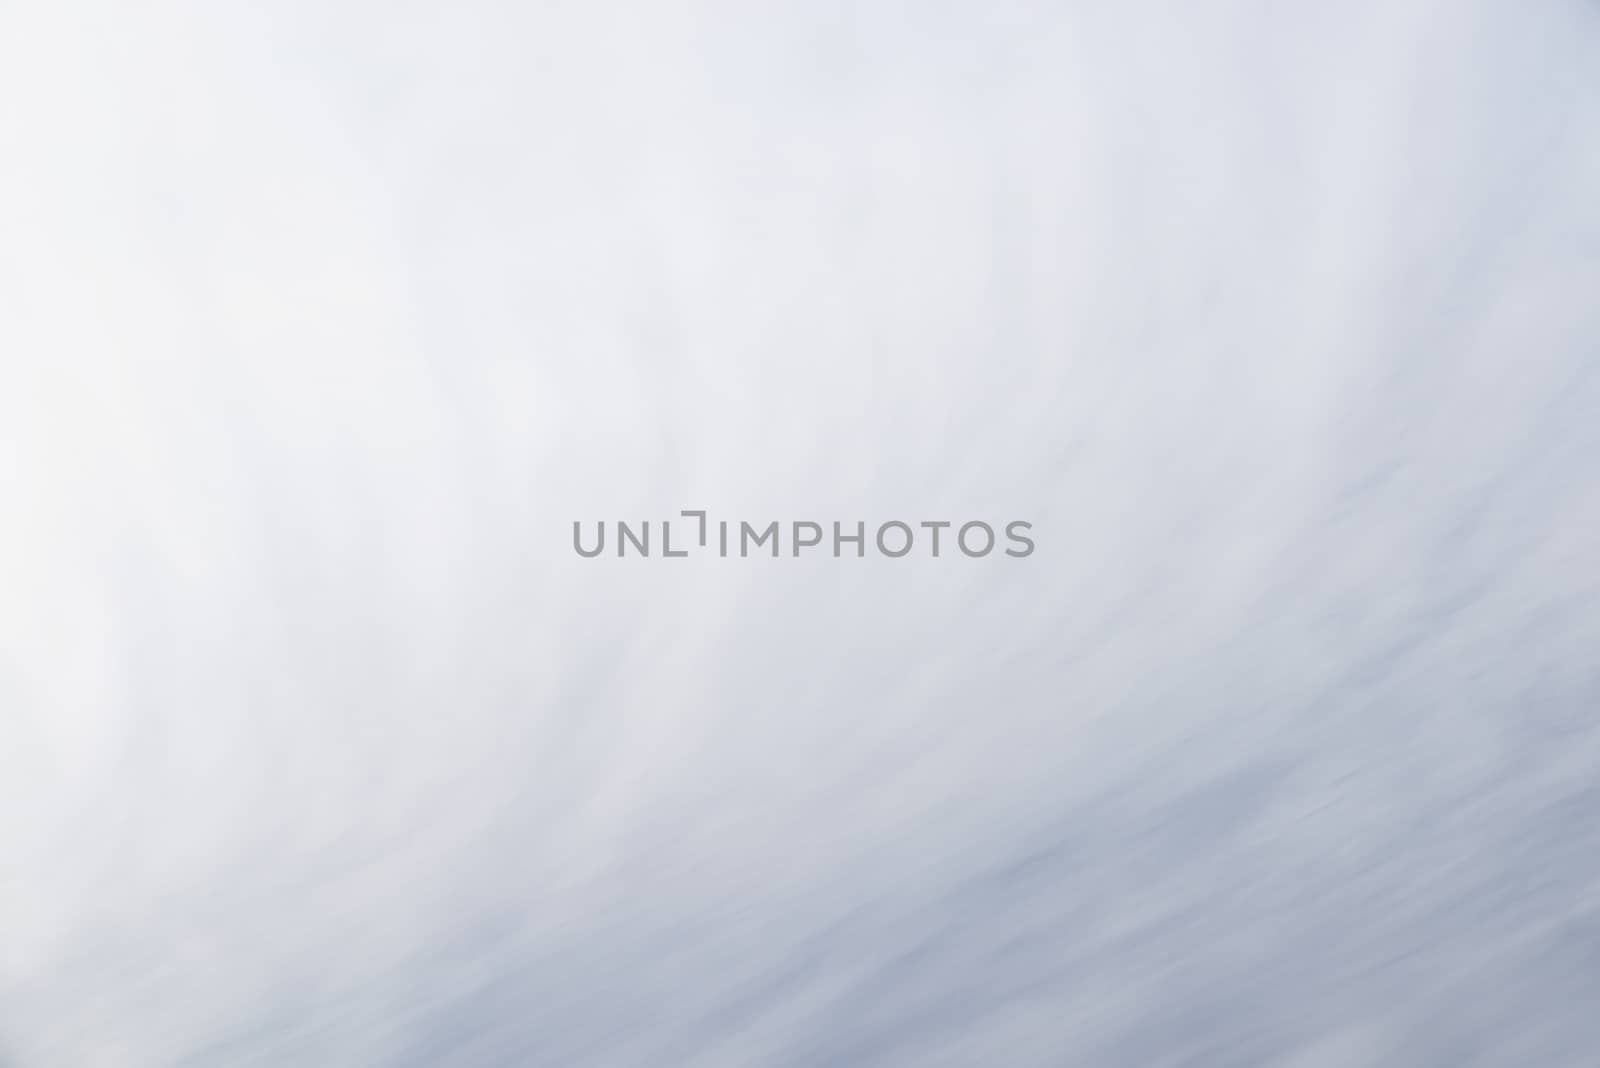 Abstract white and light gray background